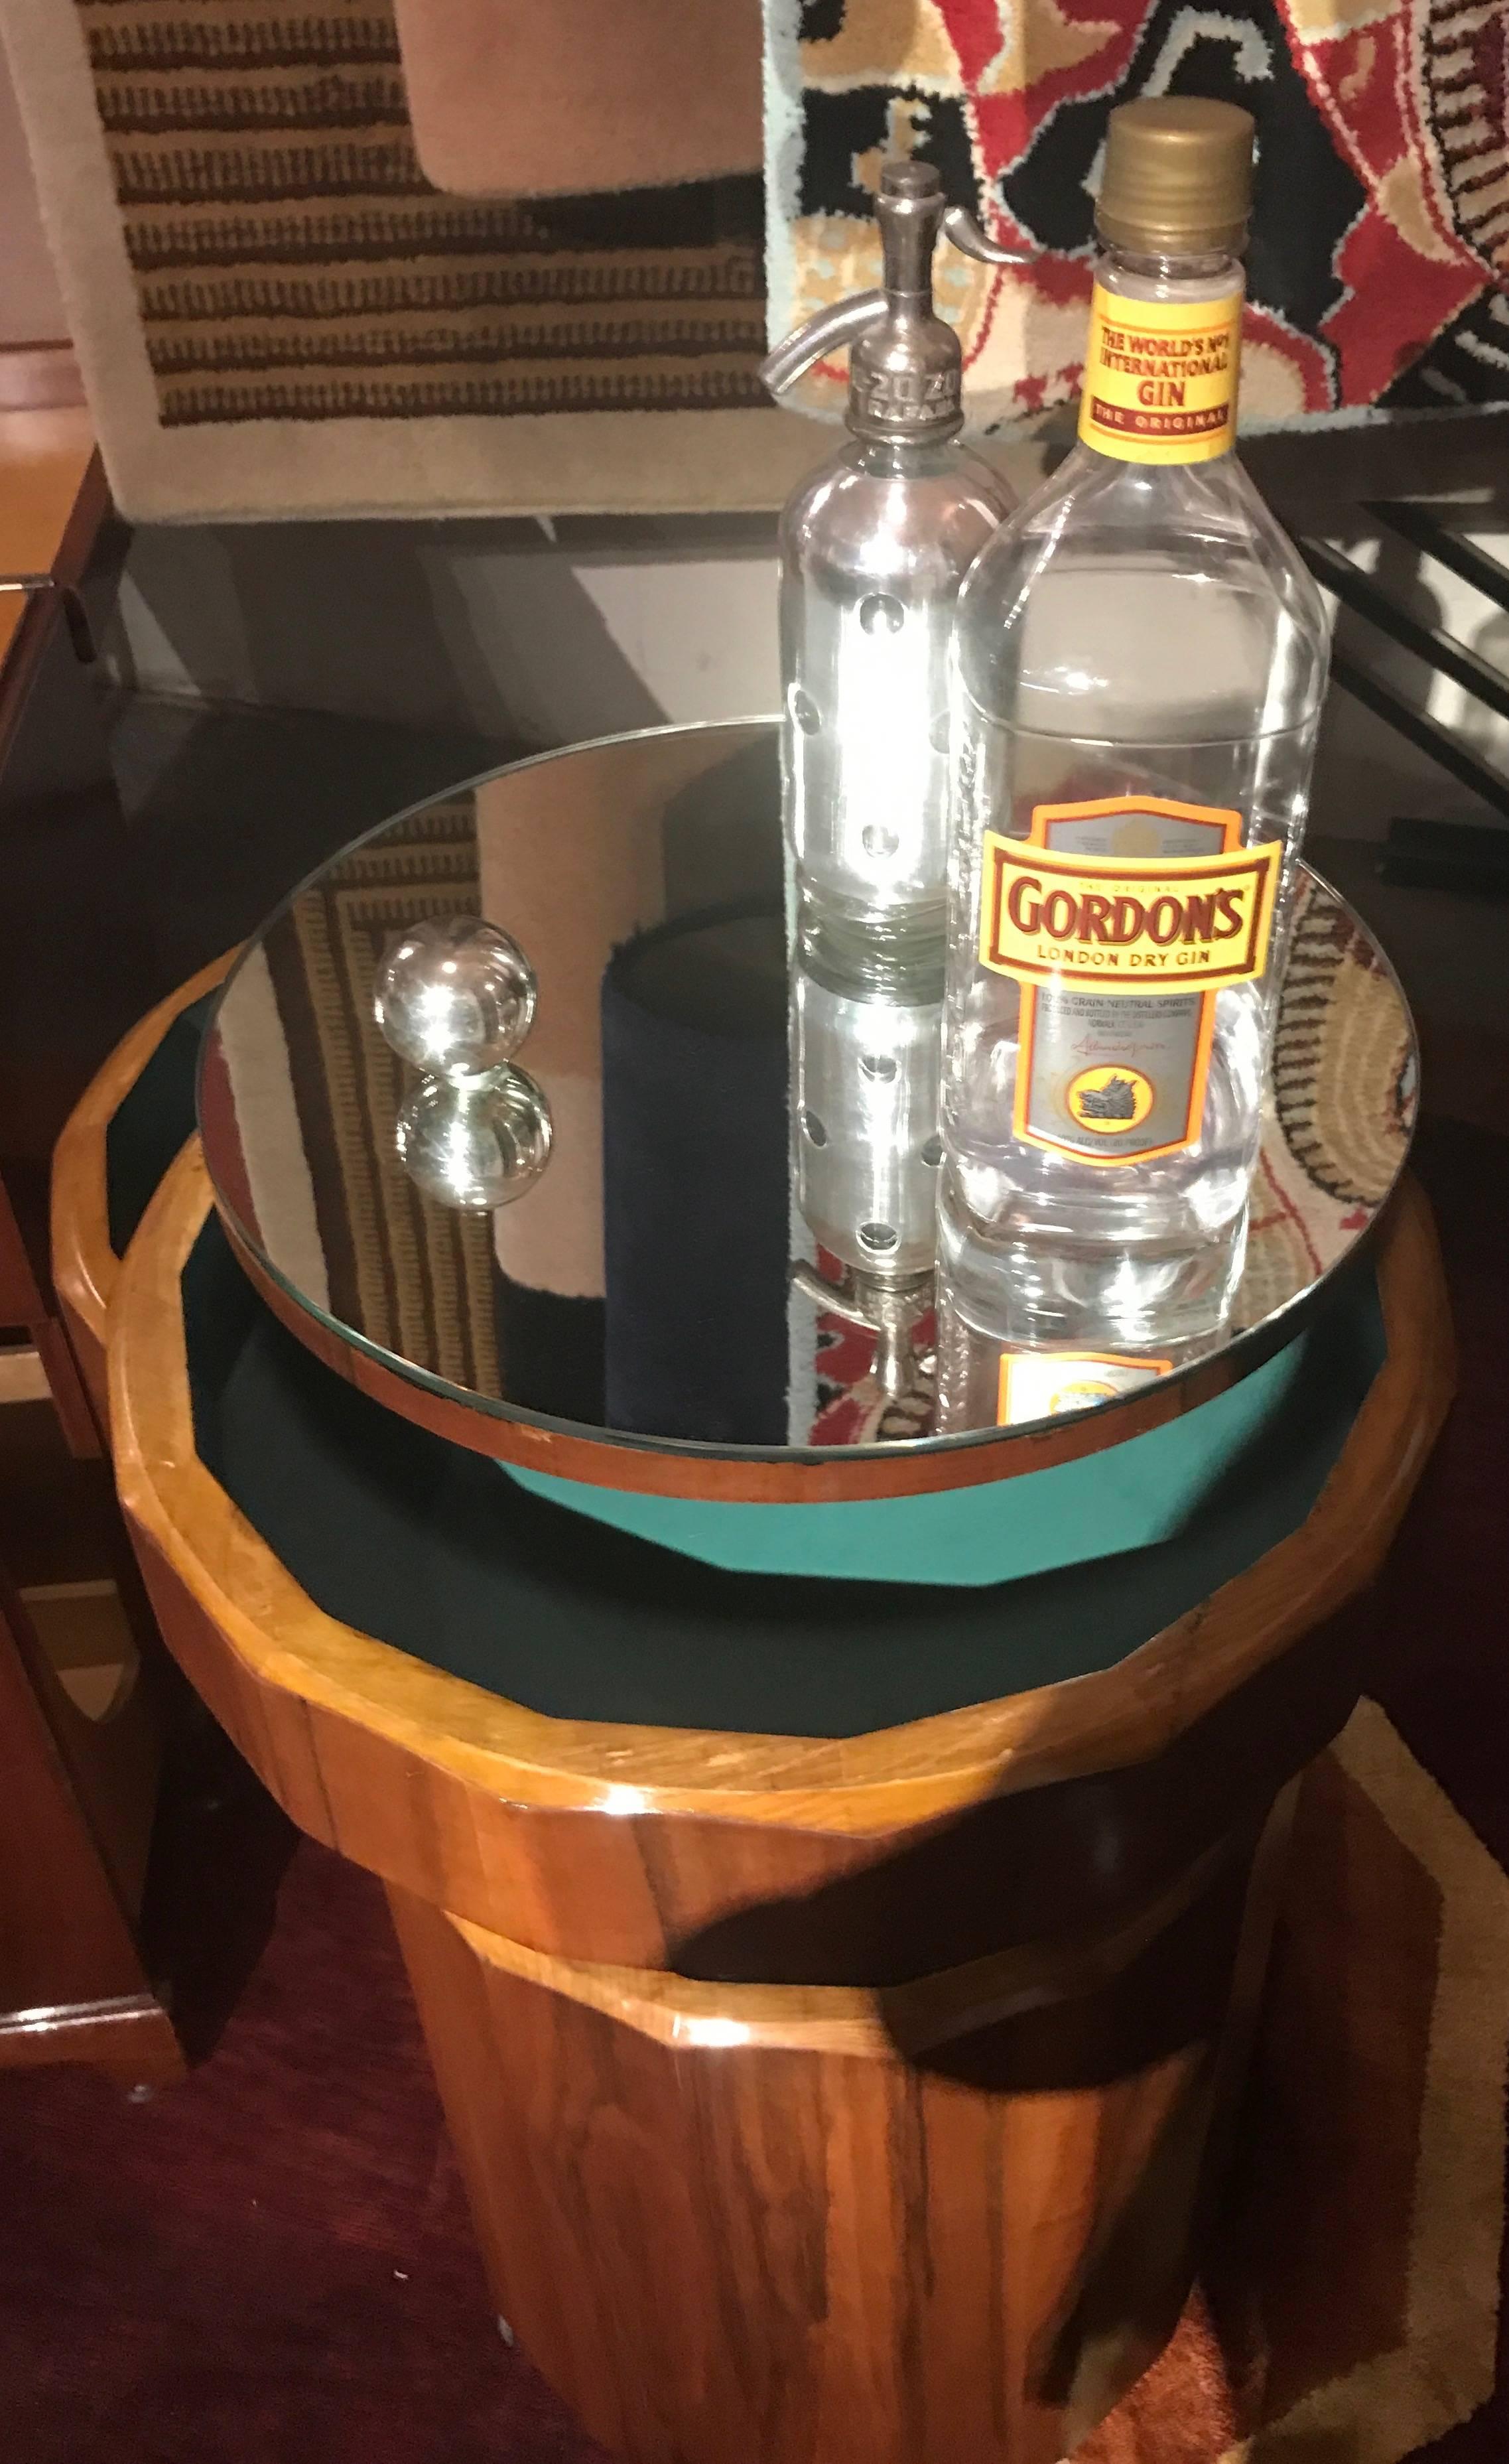 An Art Deco tyled bar cart, like an elegant ”Barrel of Fun” with fluted walnut exterior and green felt lined interior and all of it mounted on casters and “ready to roll”. When closed, with its smartly mirrored top it makes a slim side table, then